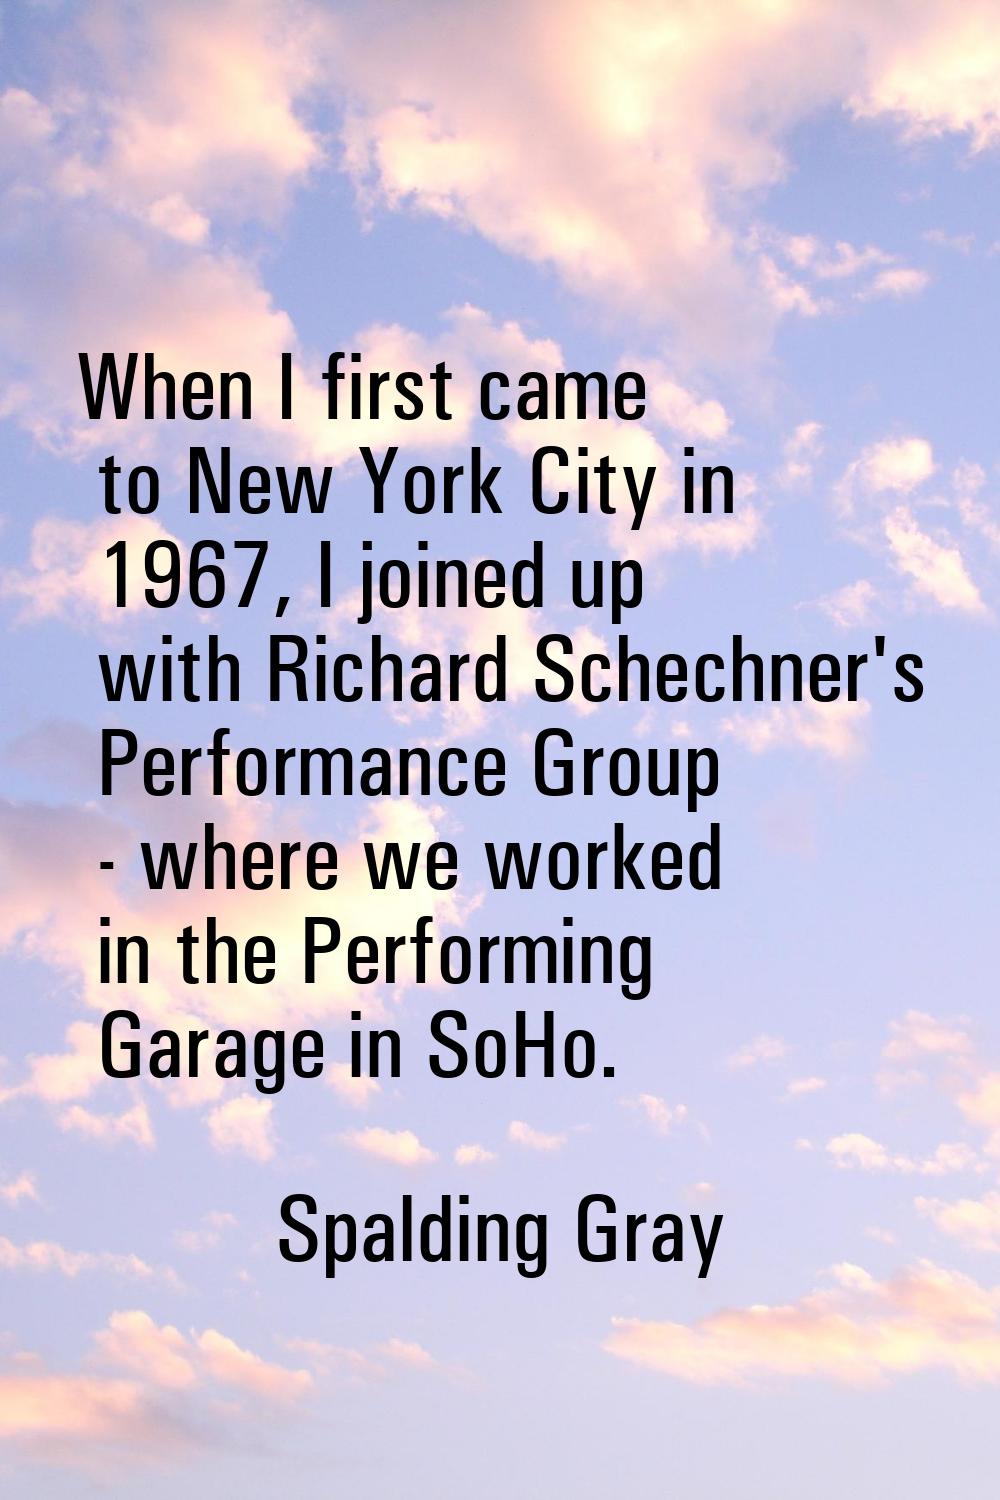 When I first came to New York City in 1967, I joined up with Richard Schechner's Performance Group 